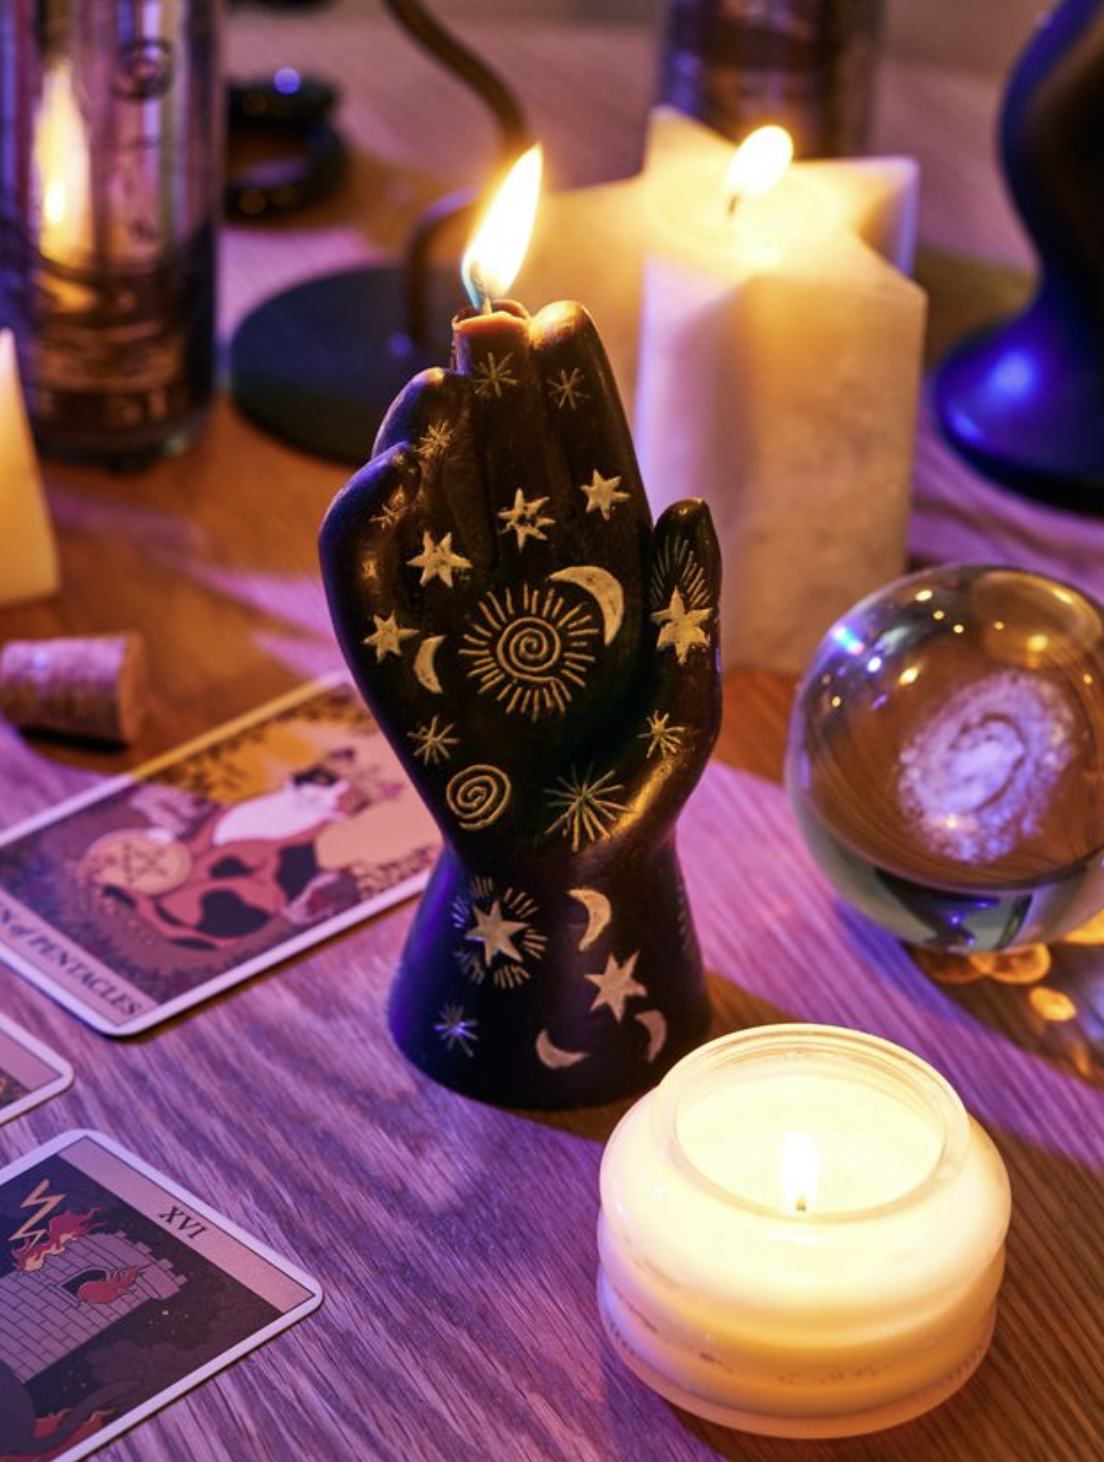 the hand shaped candle on a table next to some tarot cards